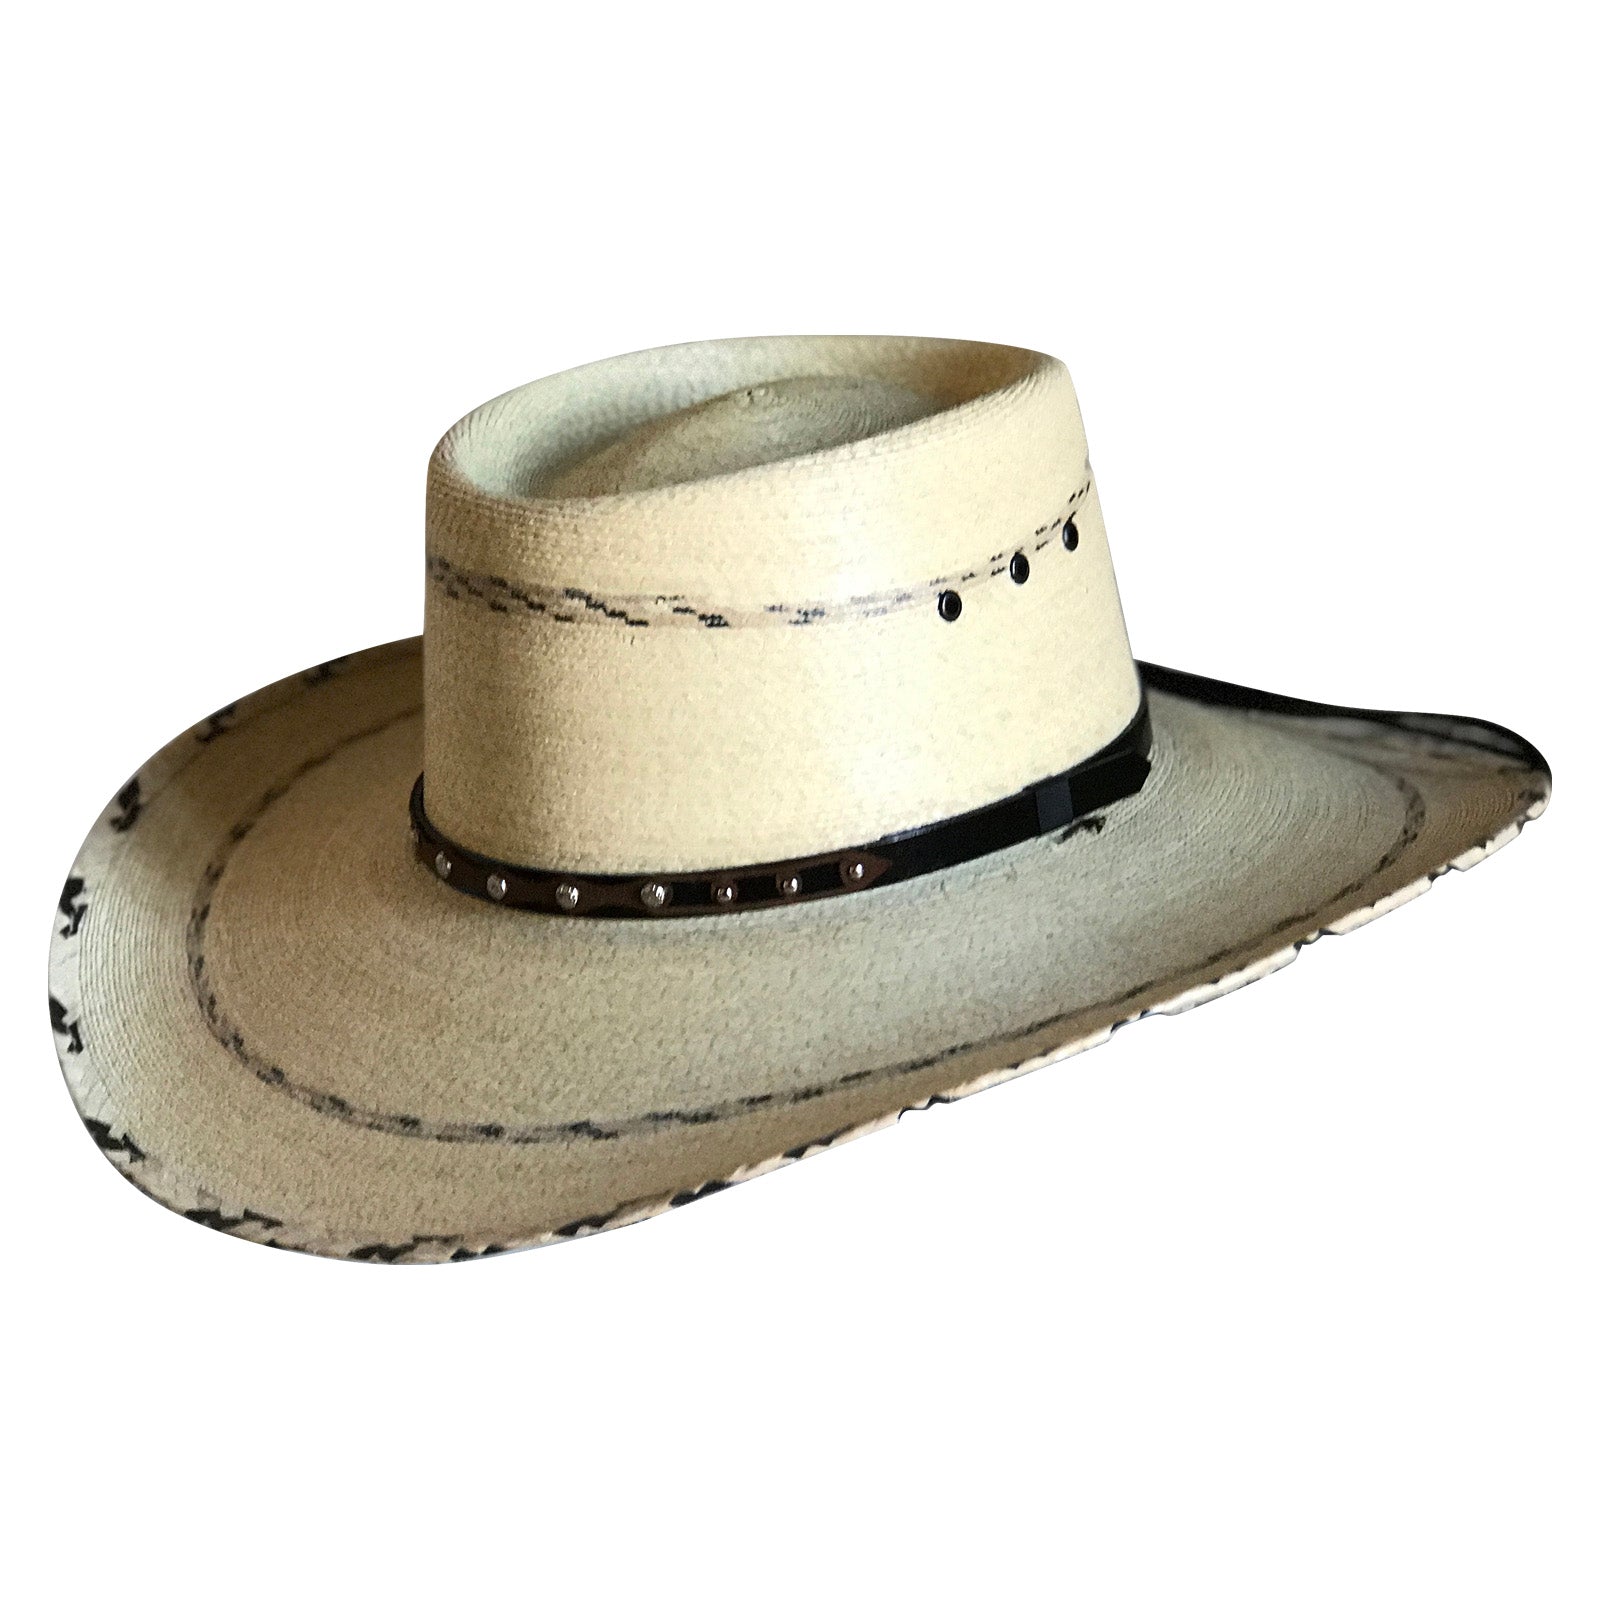 Premium Palm Straw Oval Crown Western Cowboy Hat with Chin Cord - Rockmount